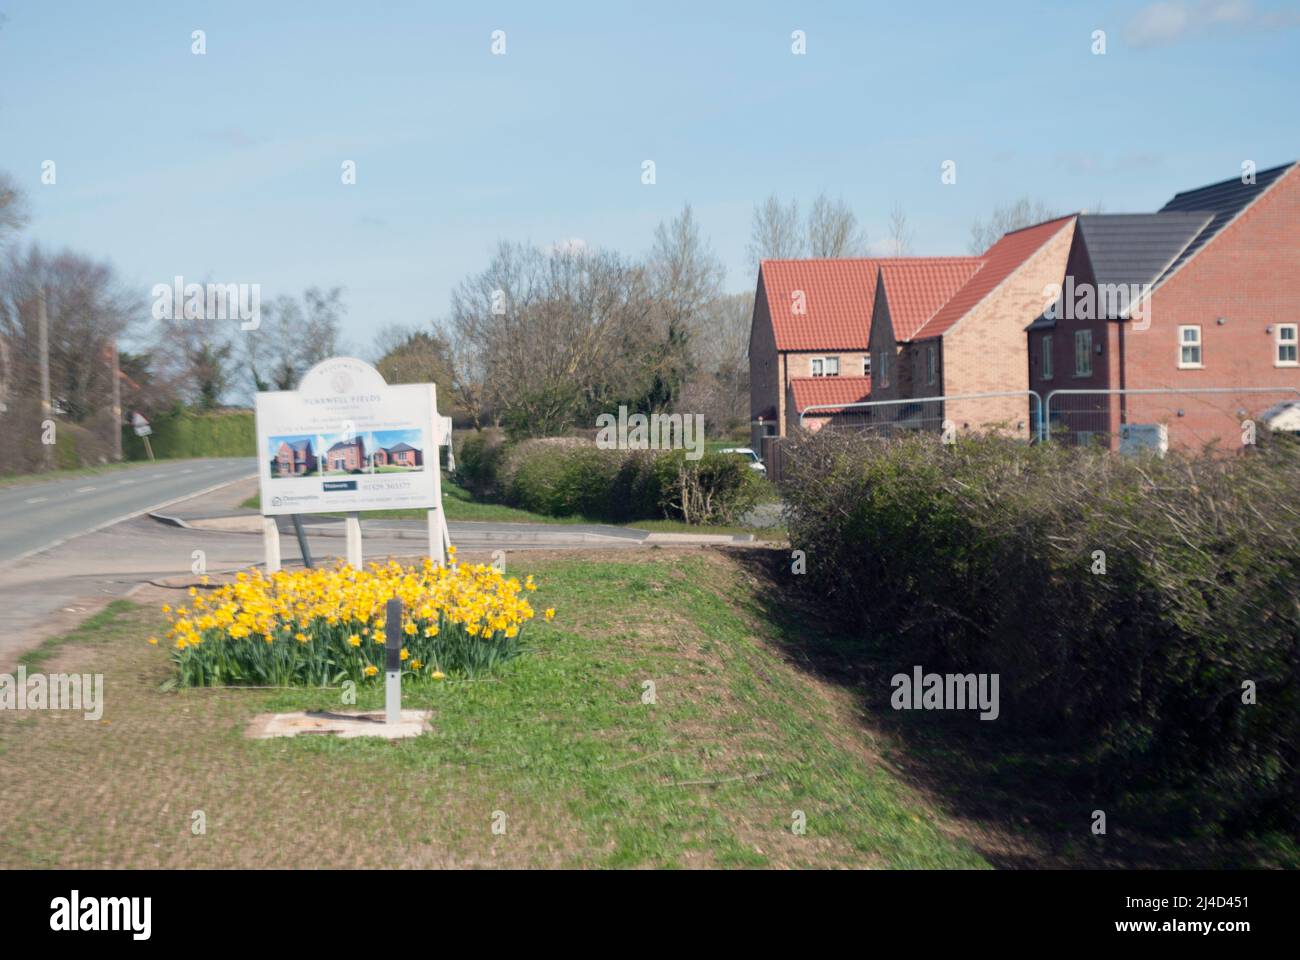 Bed of yellow daffodils in front of sign for new built housing estatein the village of Ruskington, Sleaford, Lincolnshire, England, UK Stock Photo